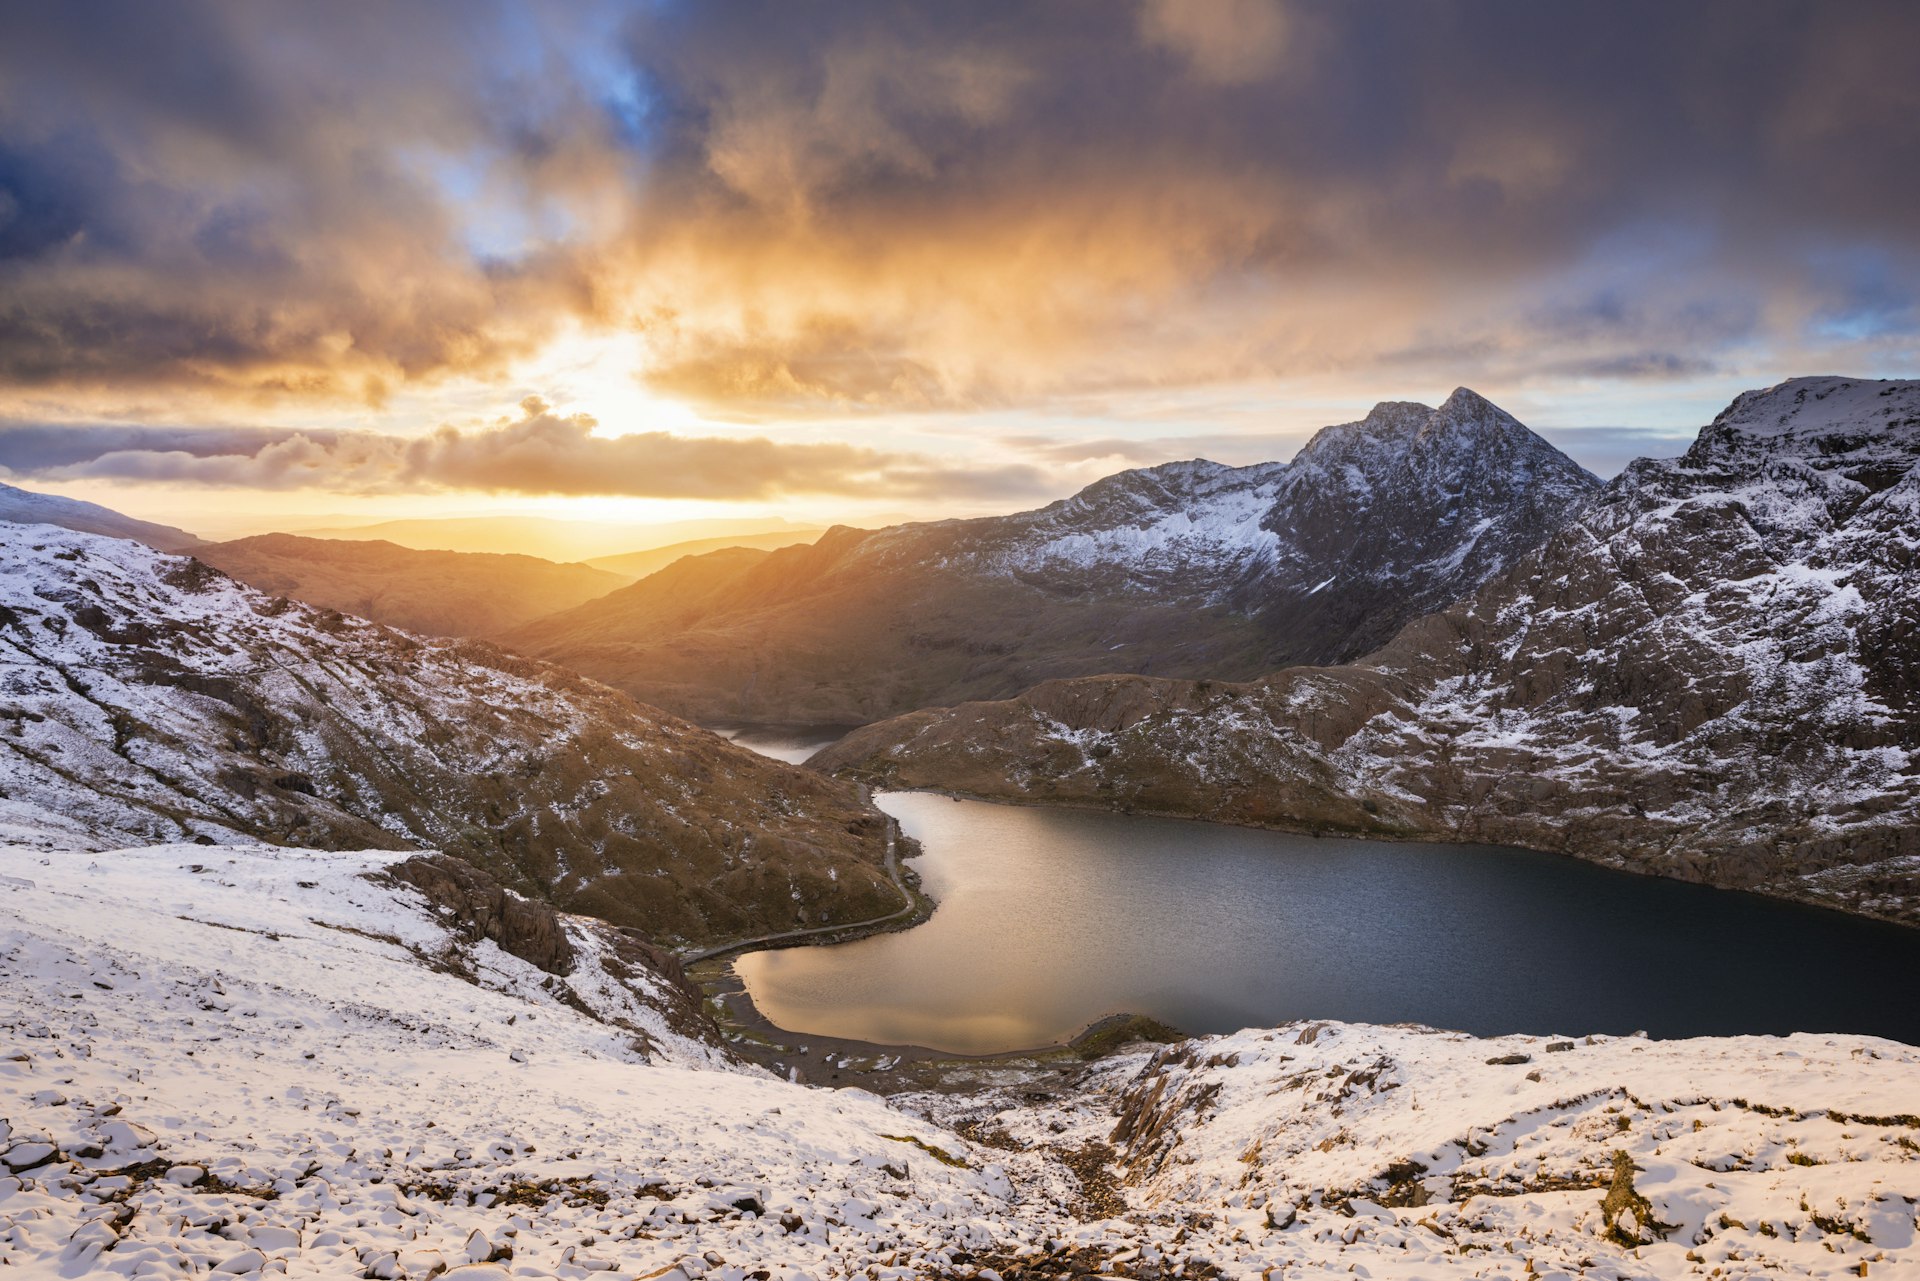 The sun rises over a lake in a snowy mountain landscape, creating orange streaks that contrast with the grey clouds